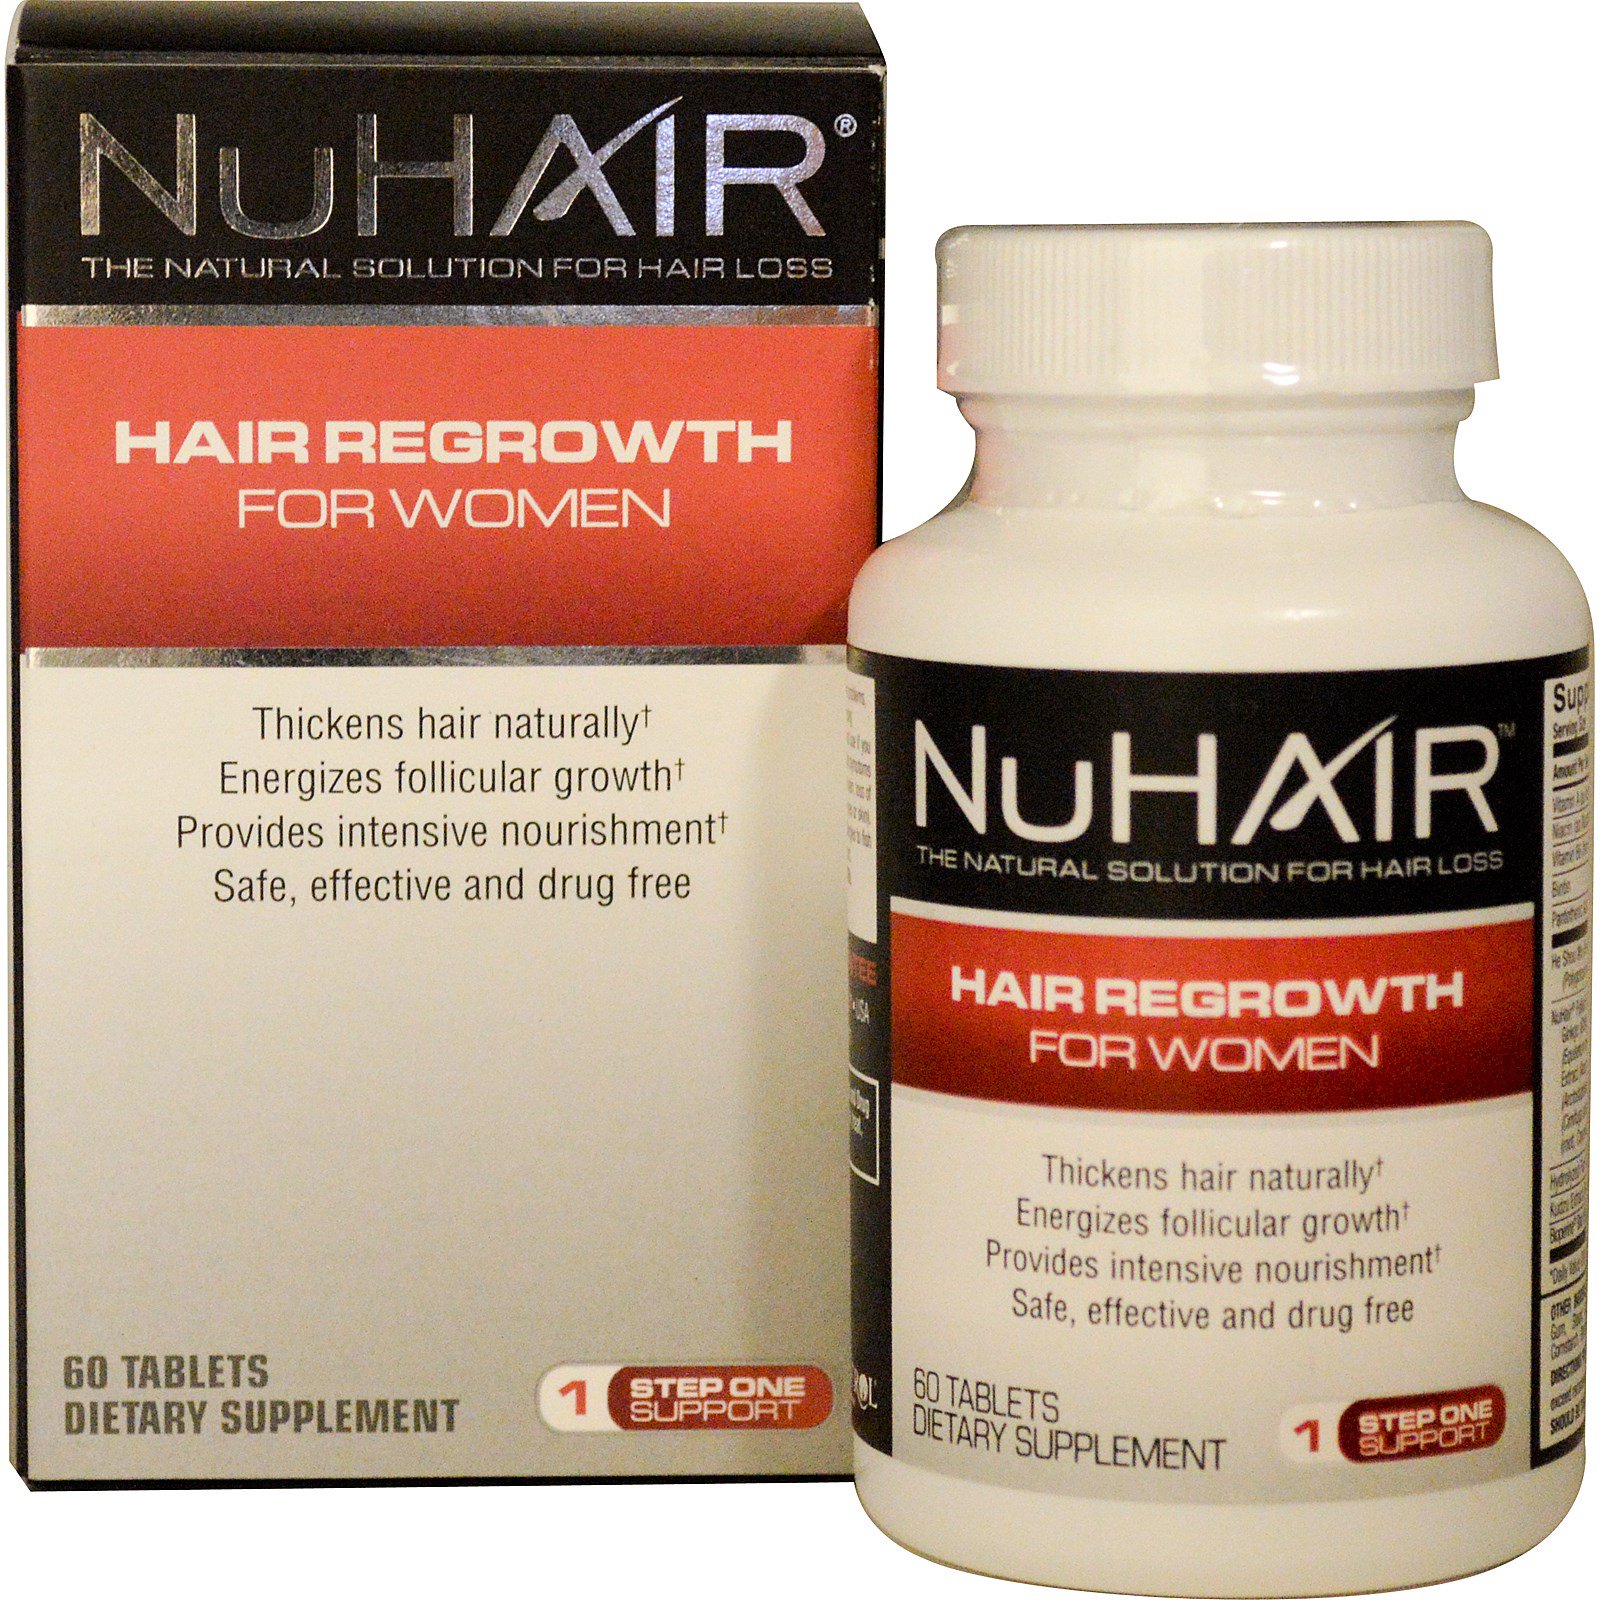 Natrol NuHair Hair Regrowth For Women Step One Support 60